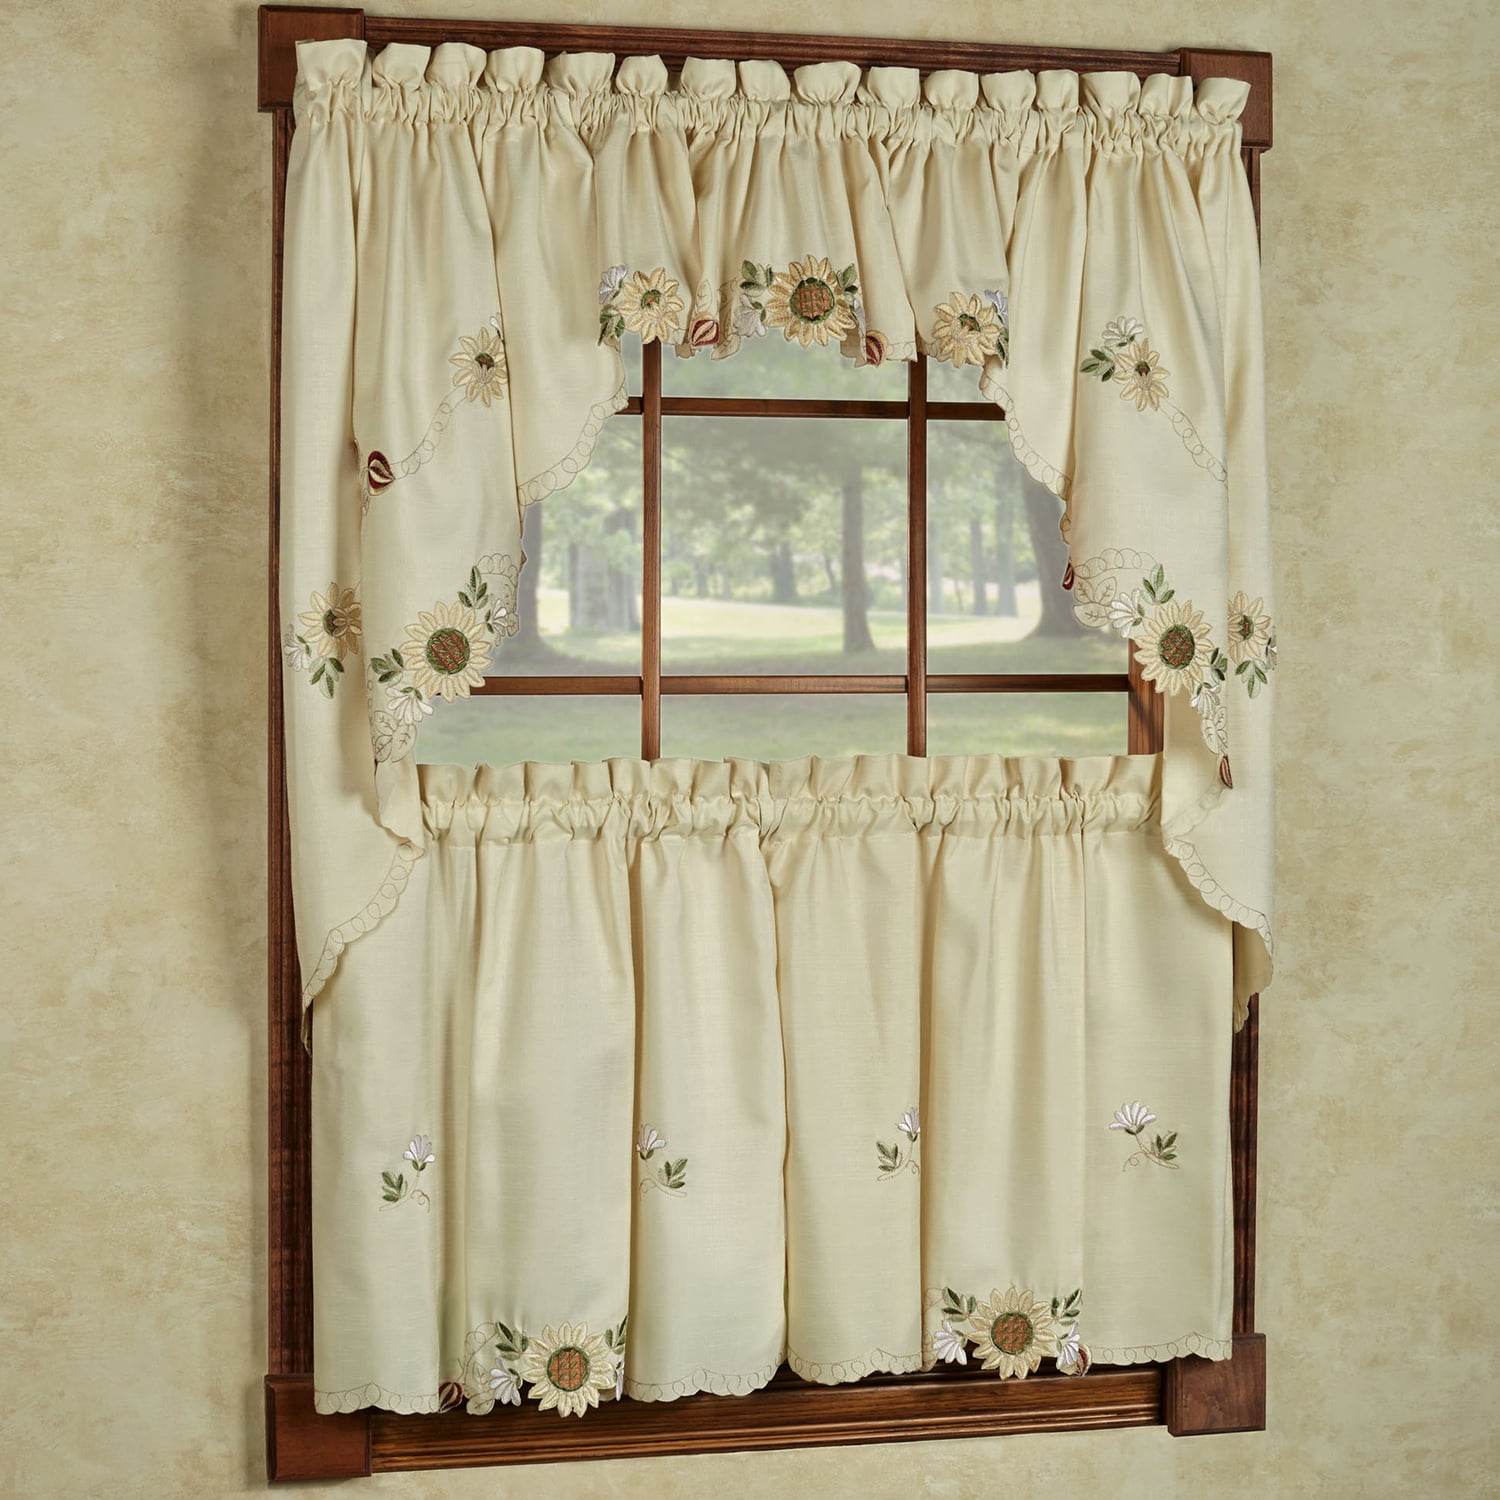 Fruitful Embroidered Kitchen Ascot Valances and Tier Curtains